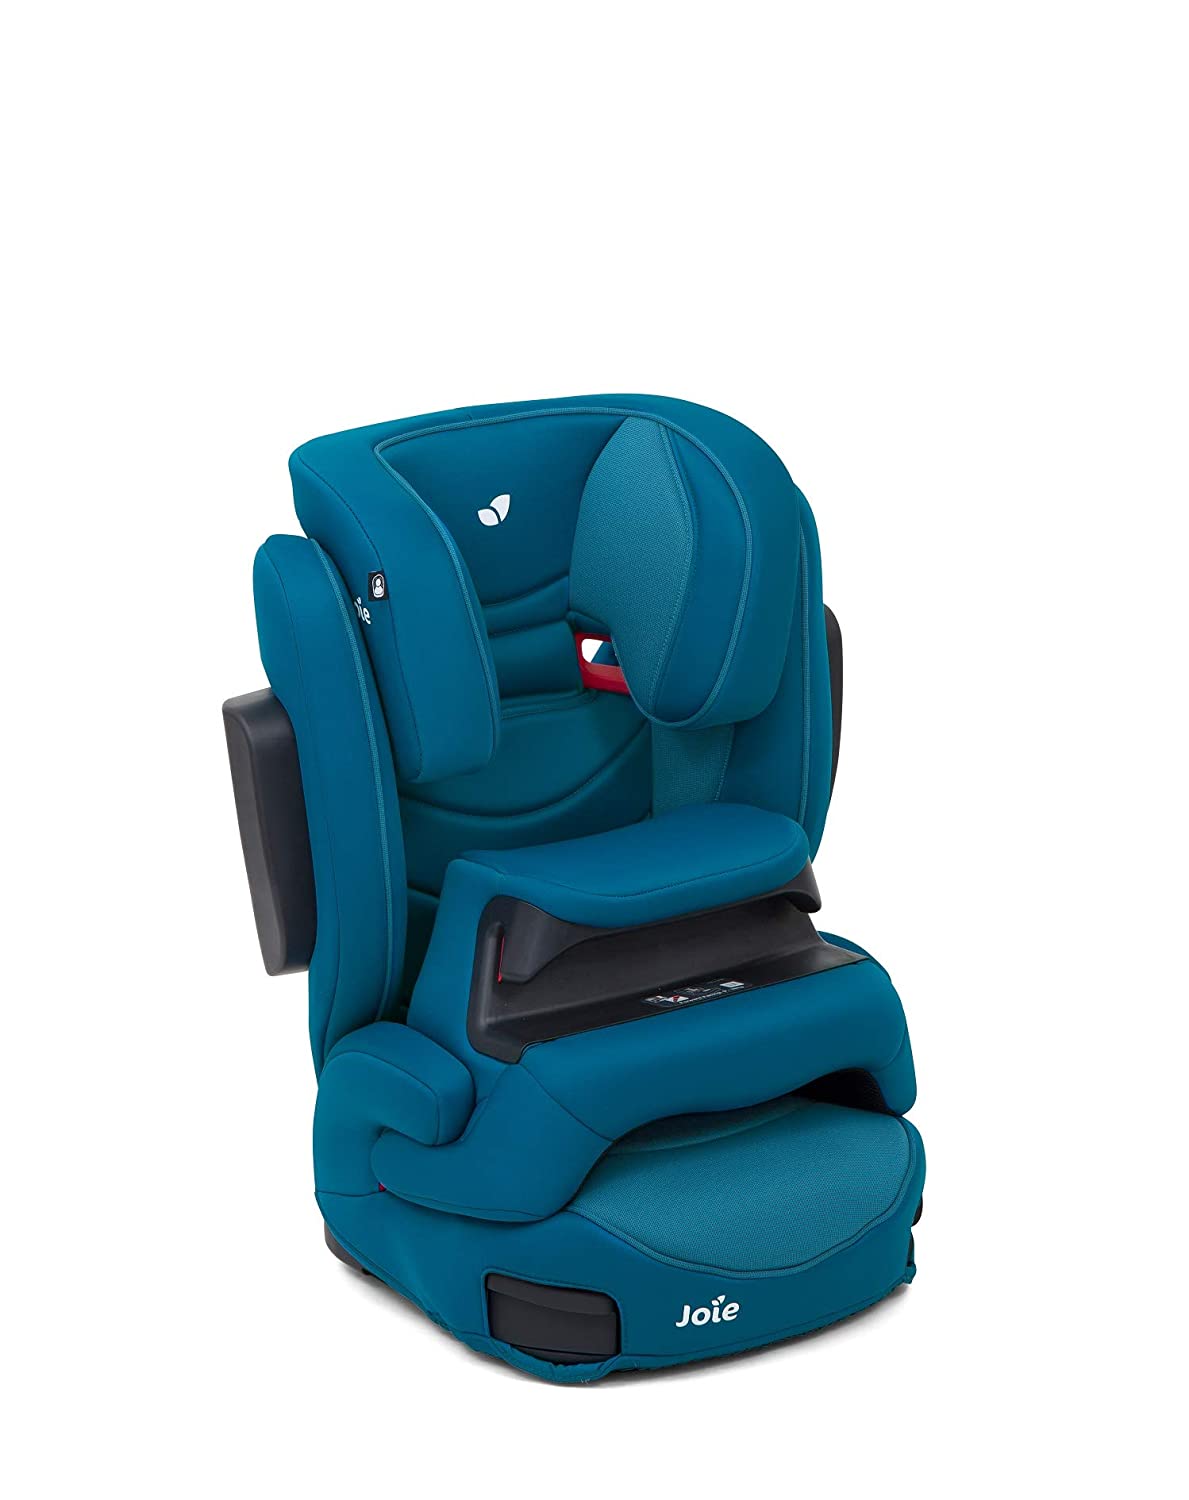 Joie Booster seat with backrest.